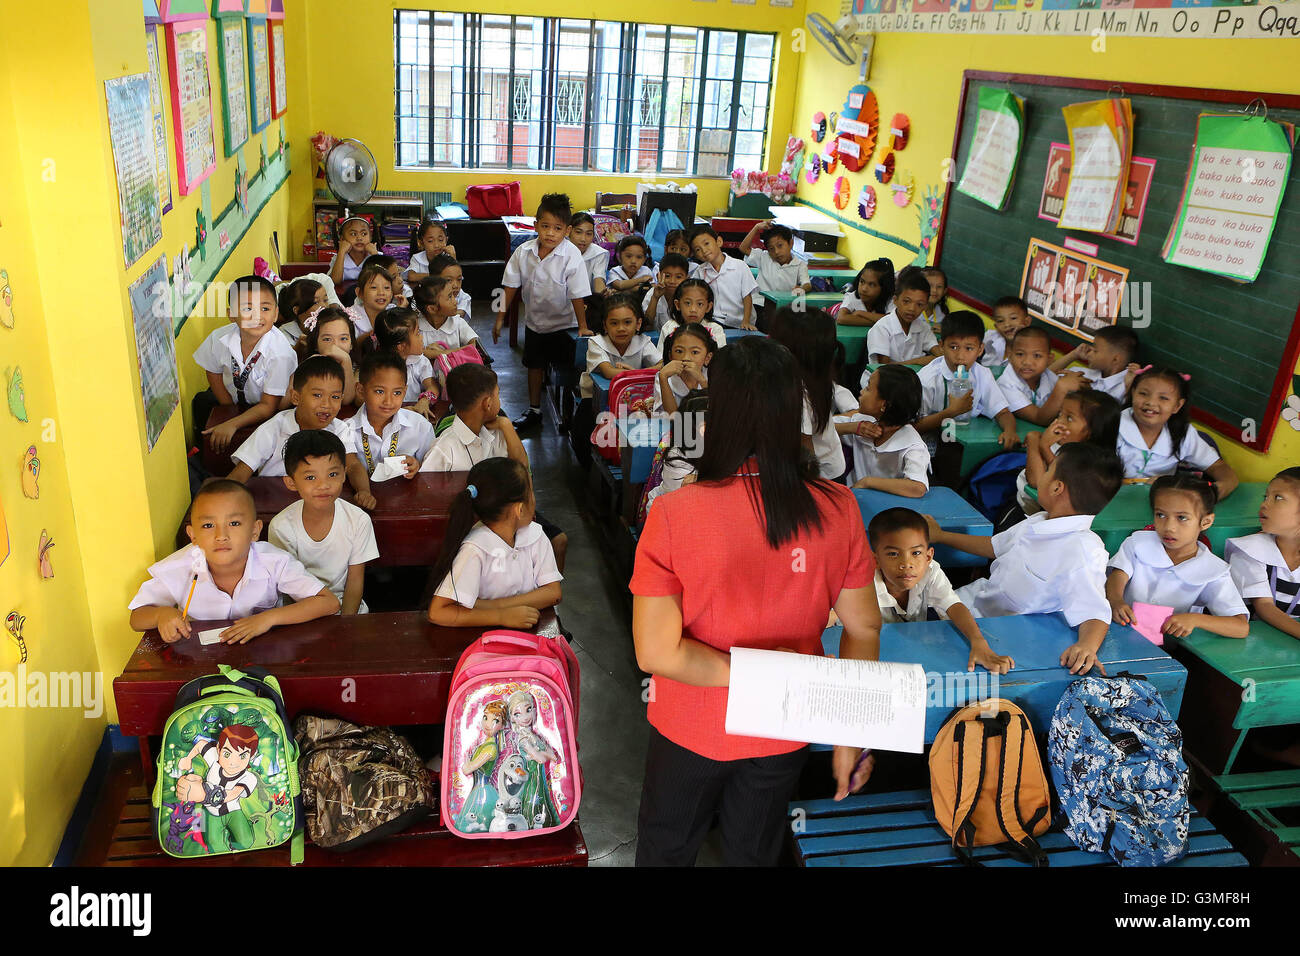 (160613) -- QUEZON CITY (THE PHILIPPINES), June 13, 2016 (Xinhua) -- Students listen to their teacher during the first day of school at the President Corazon Aquino Elementary School in Quezon City, the Philippines, on June 13, 2016. Around 25 million students attended elementary and high school classes all over the country at the beginning of the school year 2016-2017, according to the Philippine Department of Education. (Xinhua/Rouelle Umali) Stock Photo